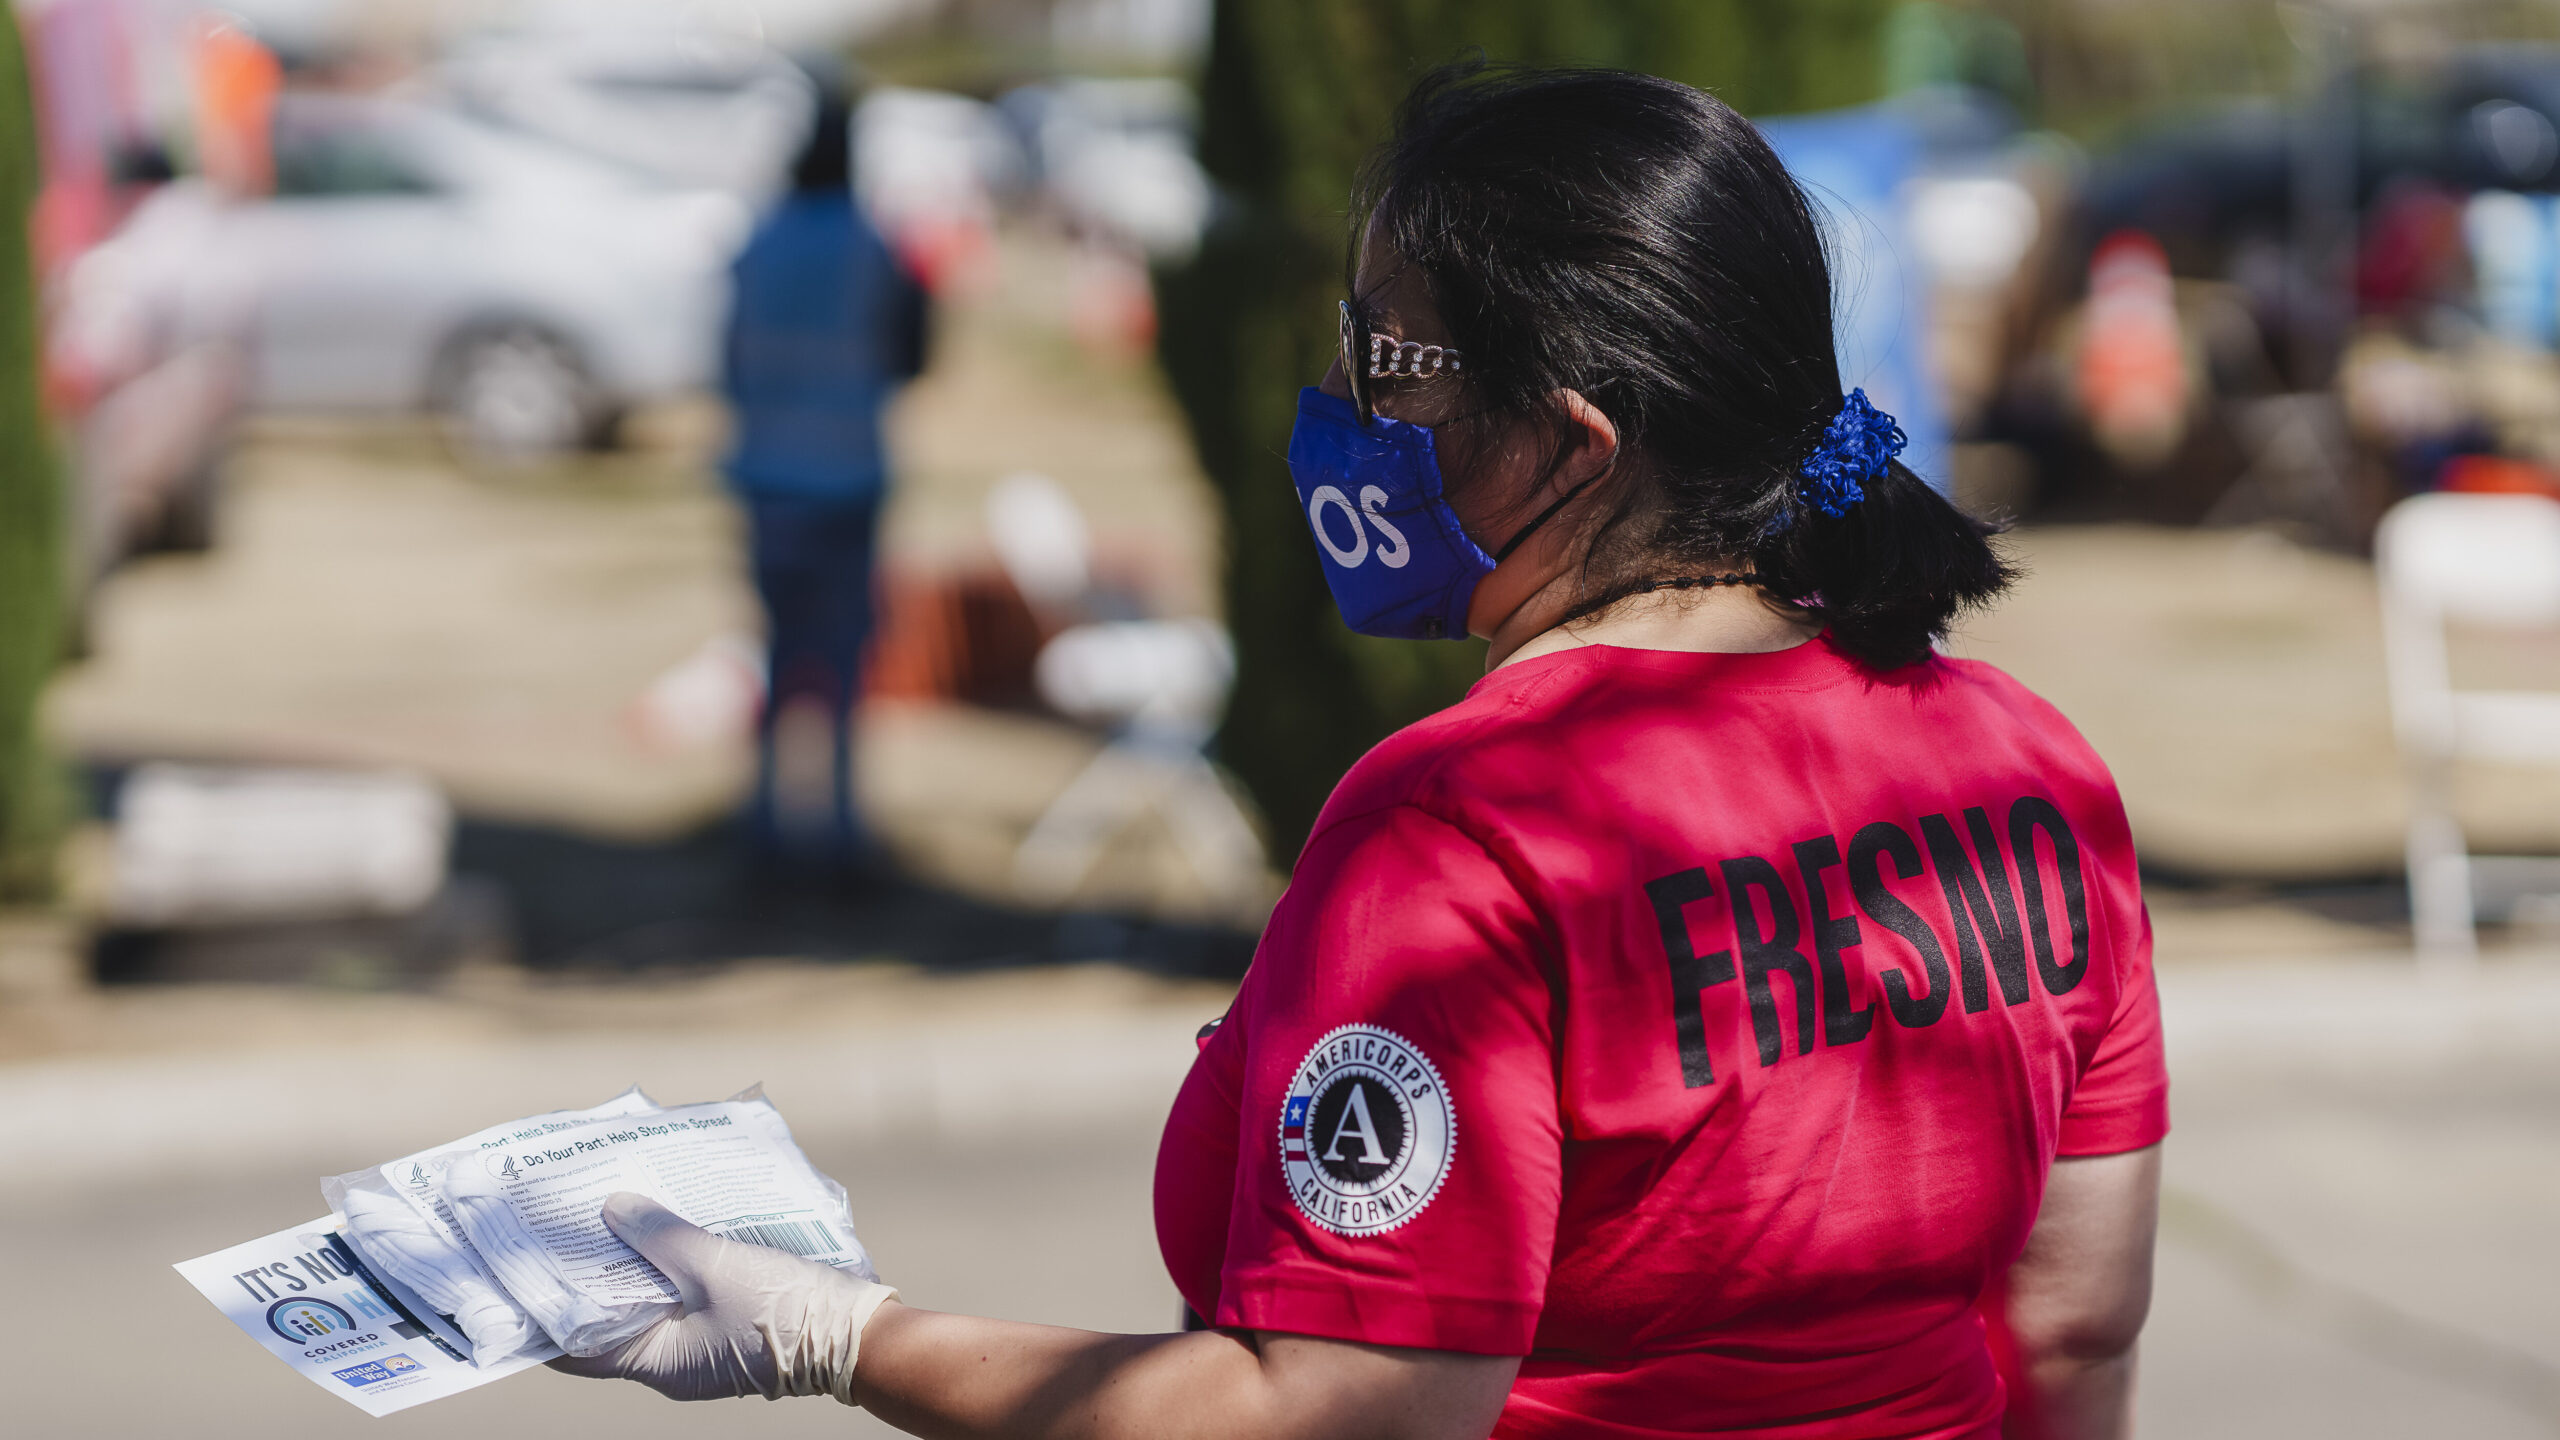 An Americorps volunteer with a shirt that has the word Fresno on the back hands out United Way Fresno and Madera Counties literature at an outdoor event